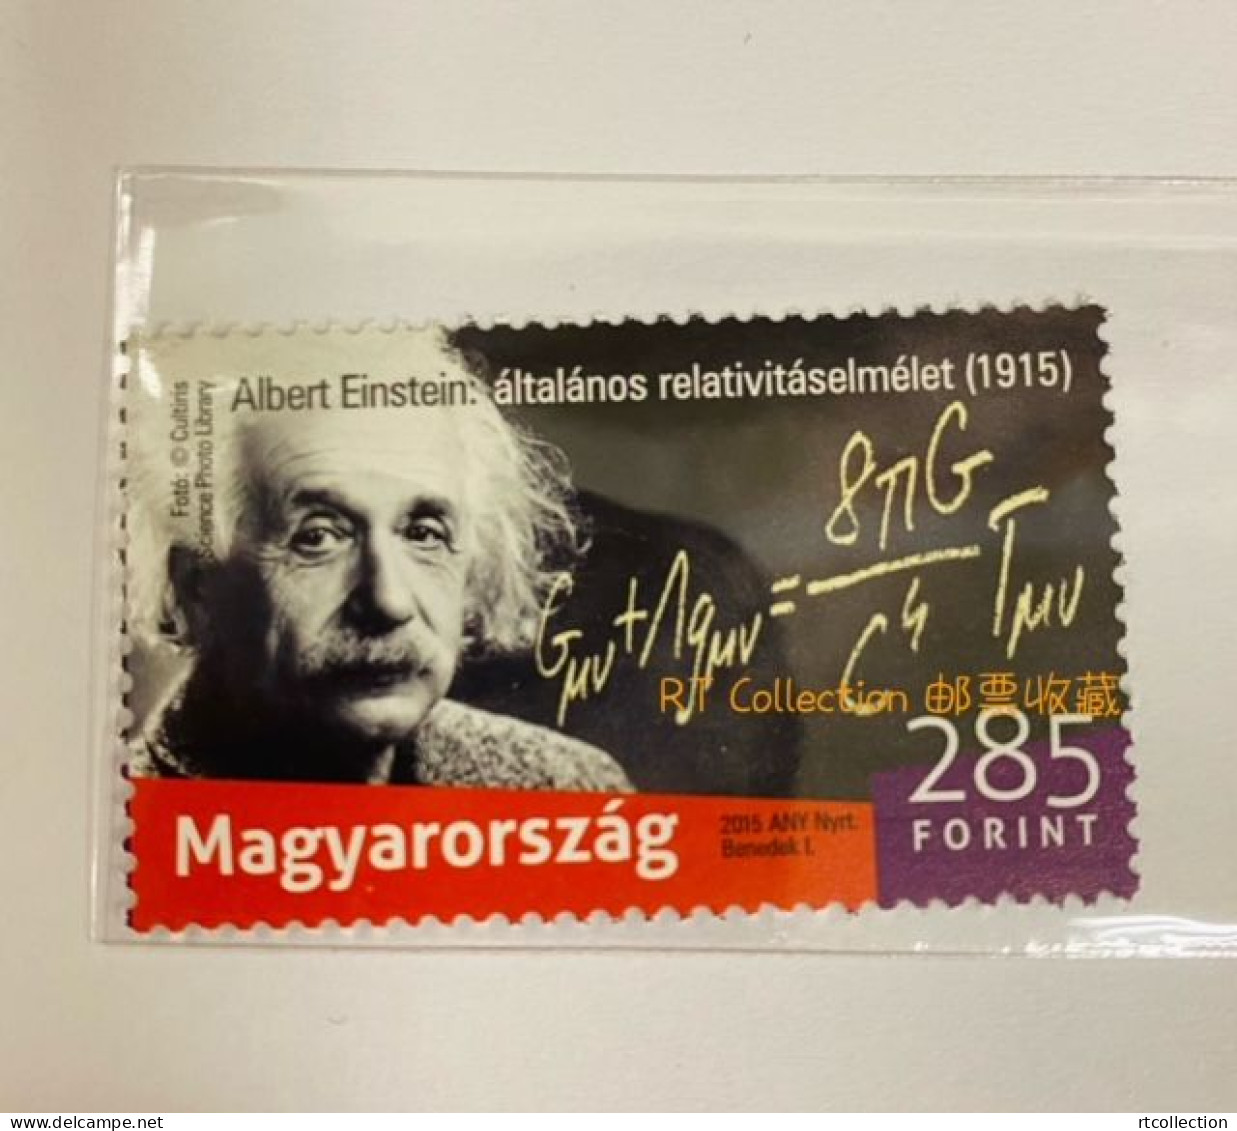 Hungary 2015 100th Anniv Albert Einstein General Theory Of Relativity Nobel Physics Physicist Sciences People Stamp MNH - Fisica